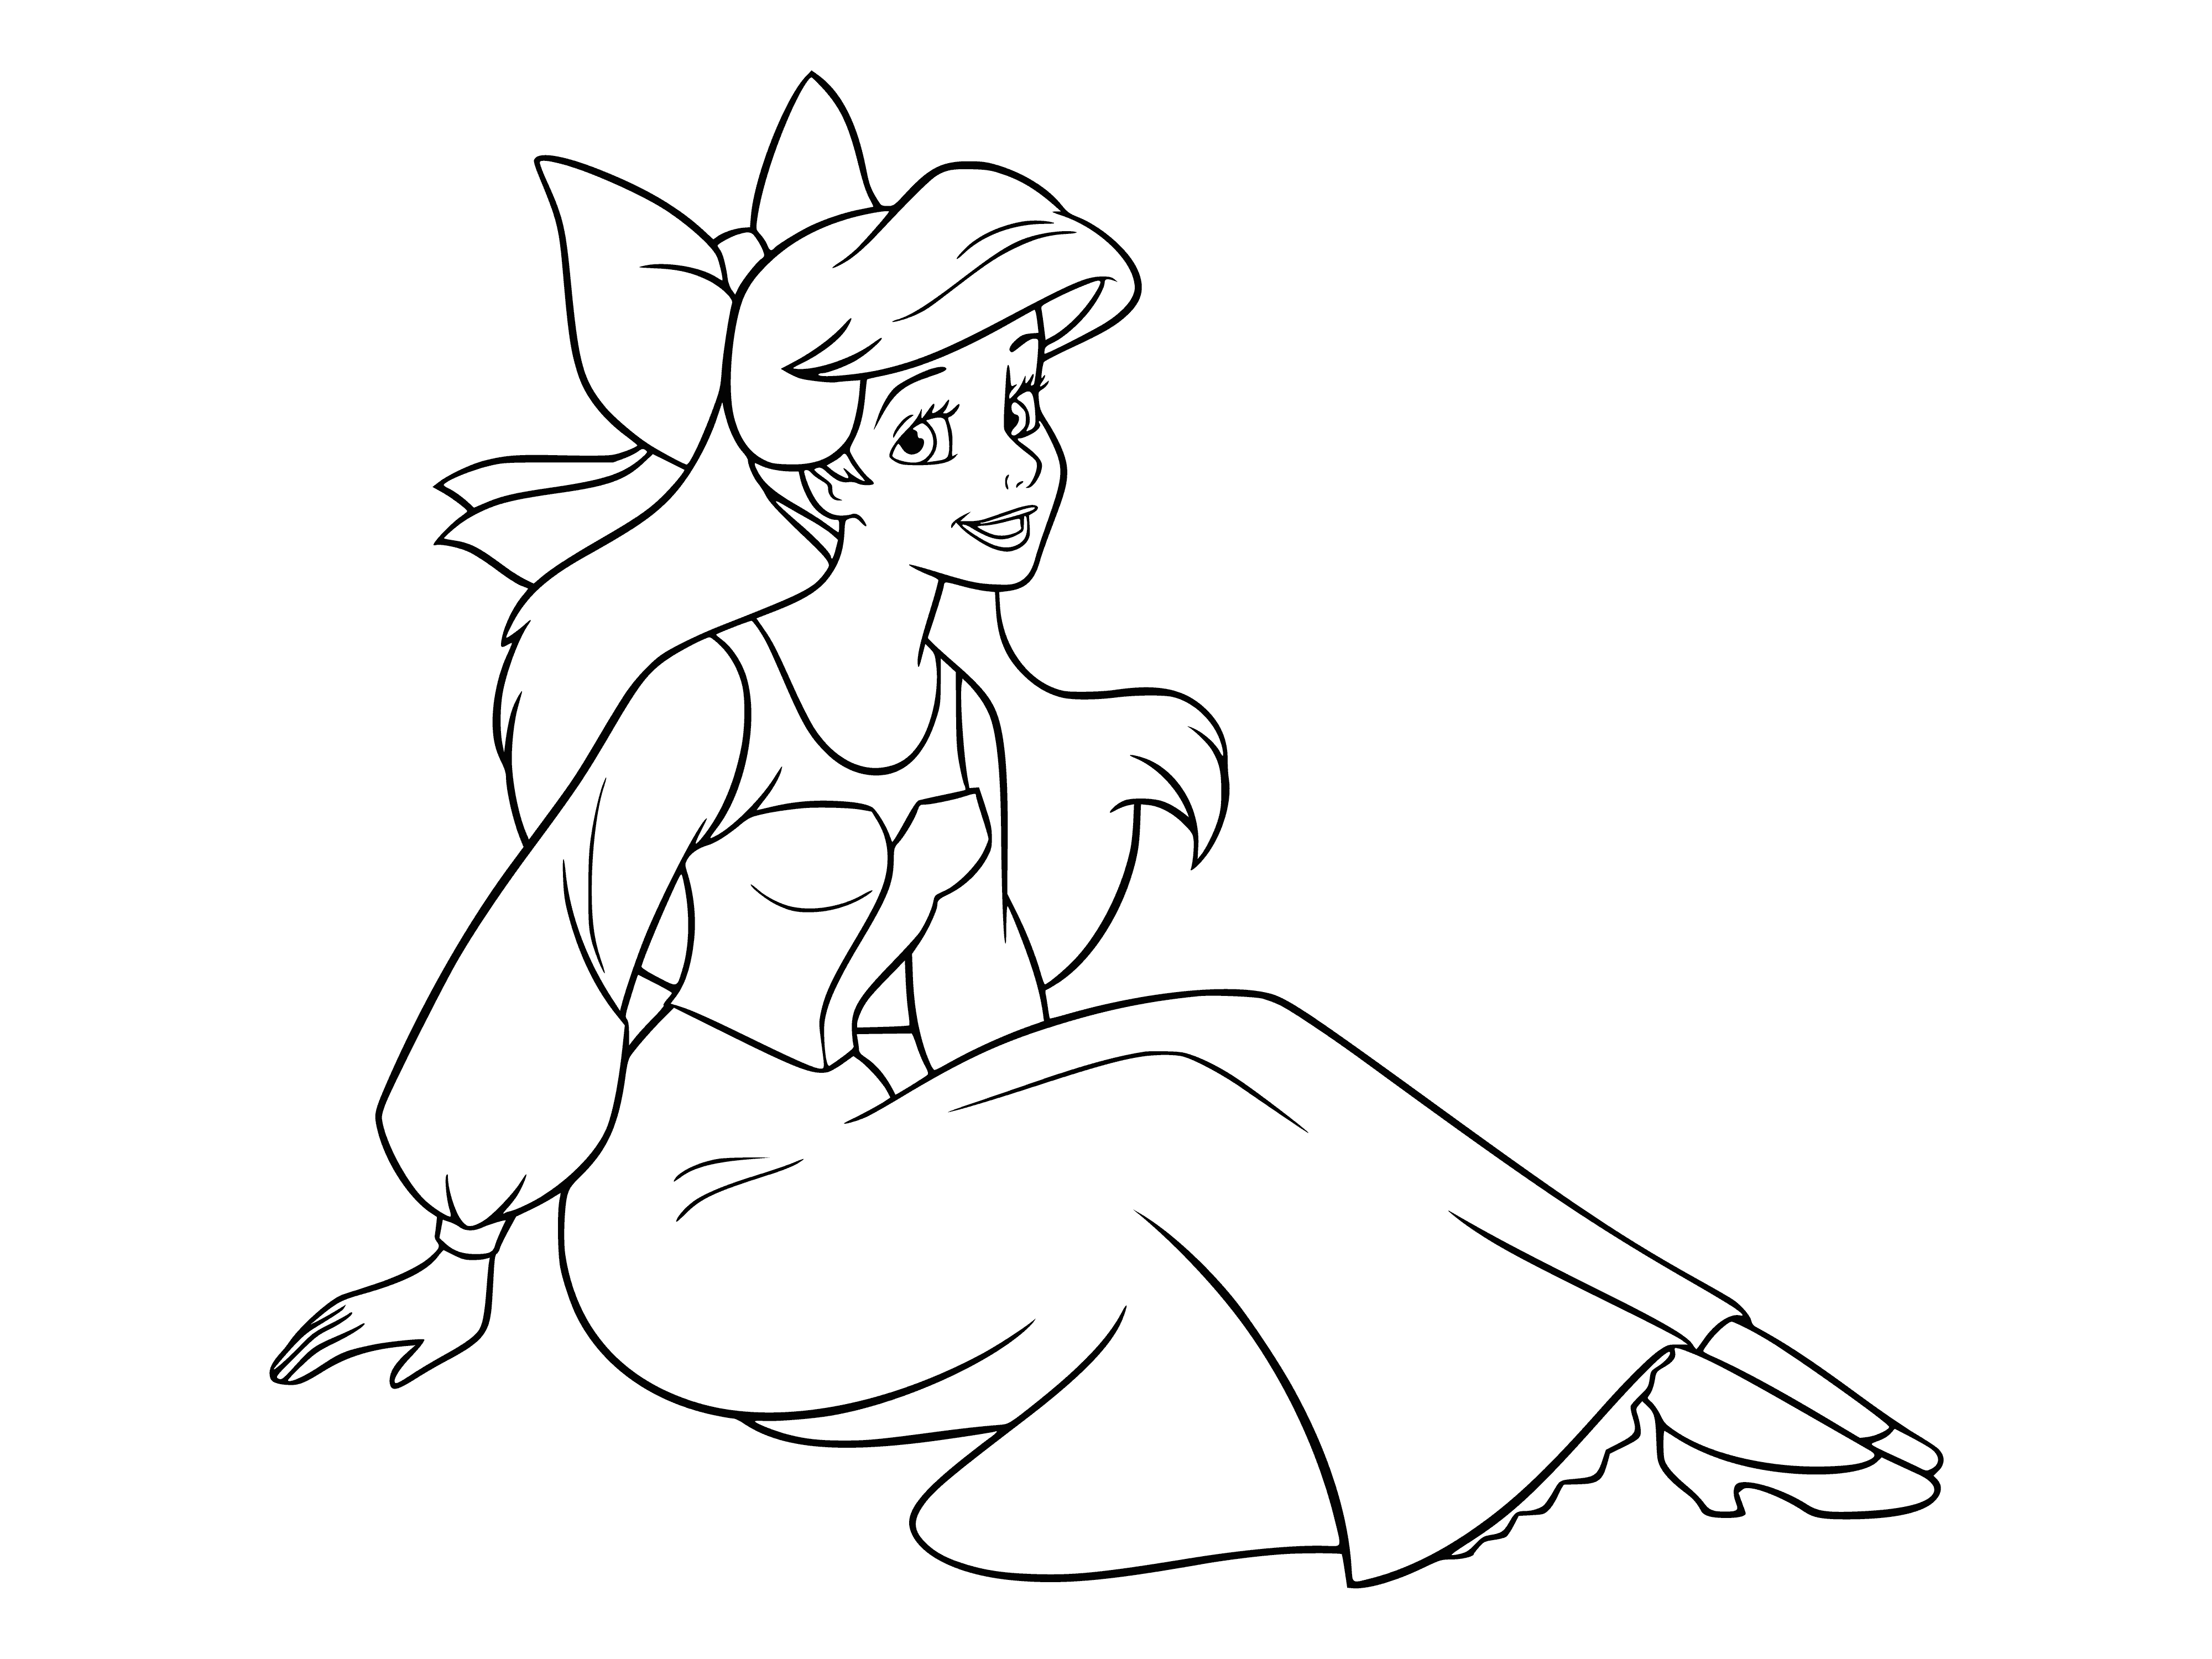 coloring page: The little mermaid looks beautiful in her party dress, happiness radiating around her as she mingles with the other guests.